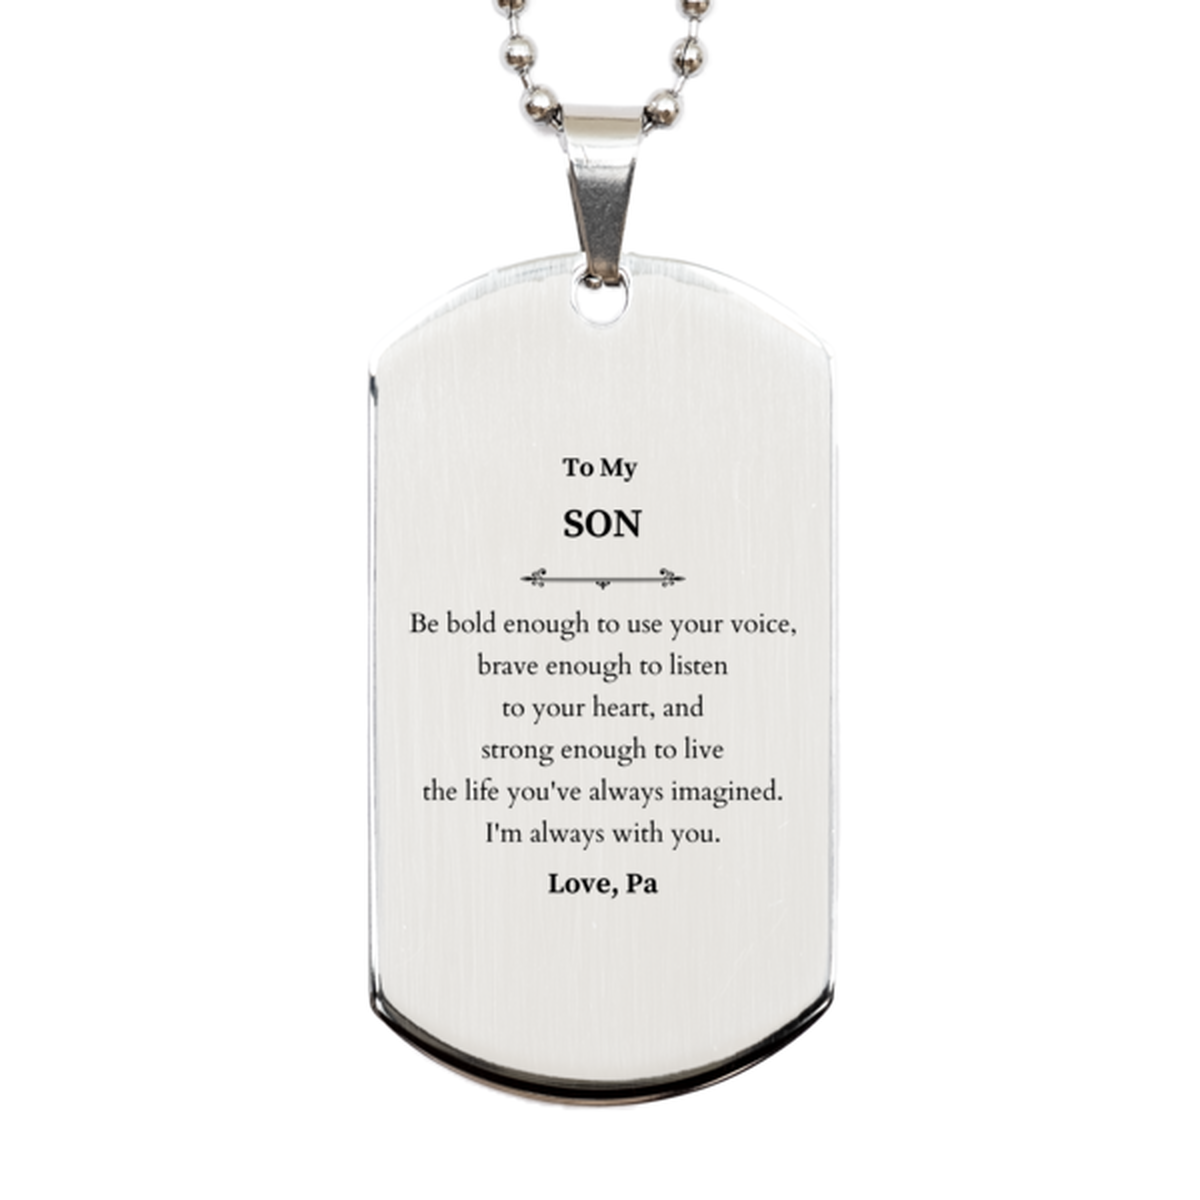 Keepsake Son Silver Dog Tag Gift Idea Graduation Christmas Birthday Son from Pa, Son Be bold enough to use your voice, brave enough to listen to your heart. Love, Pa